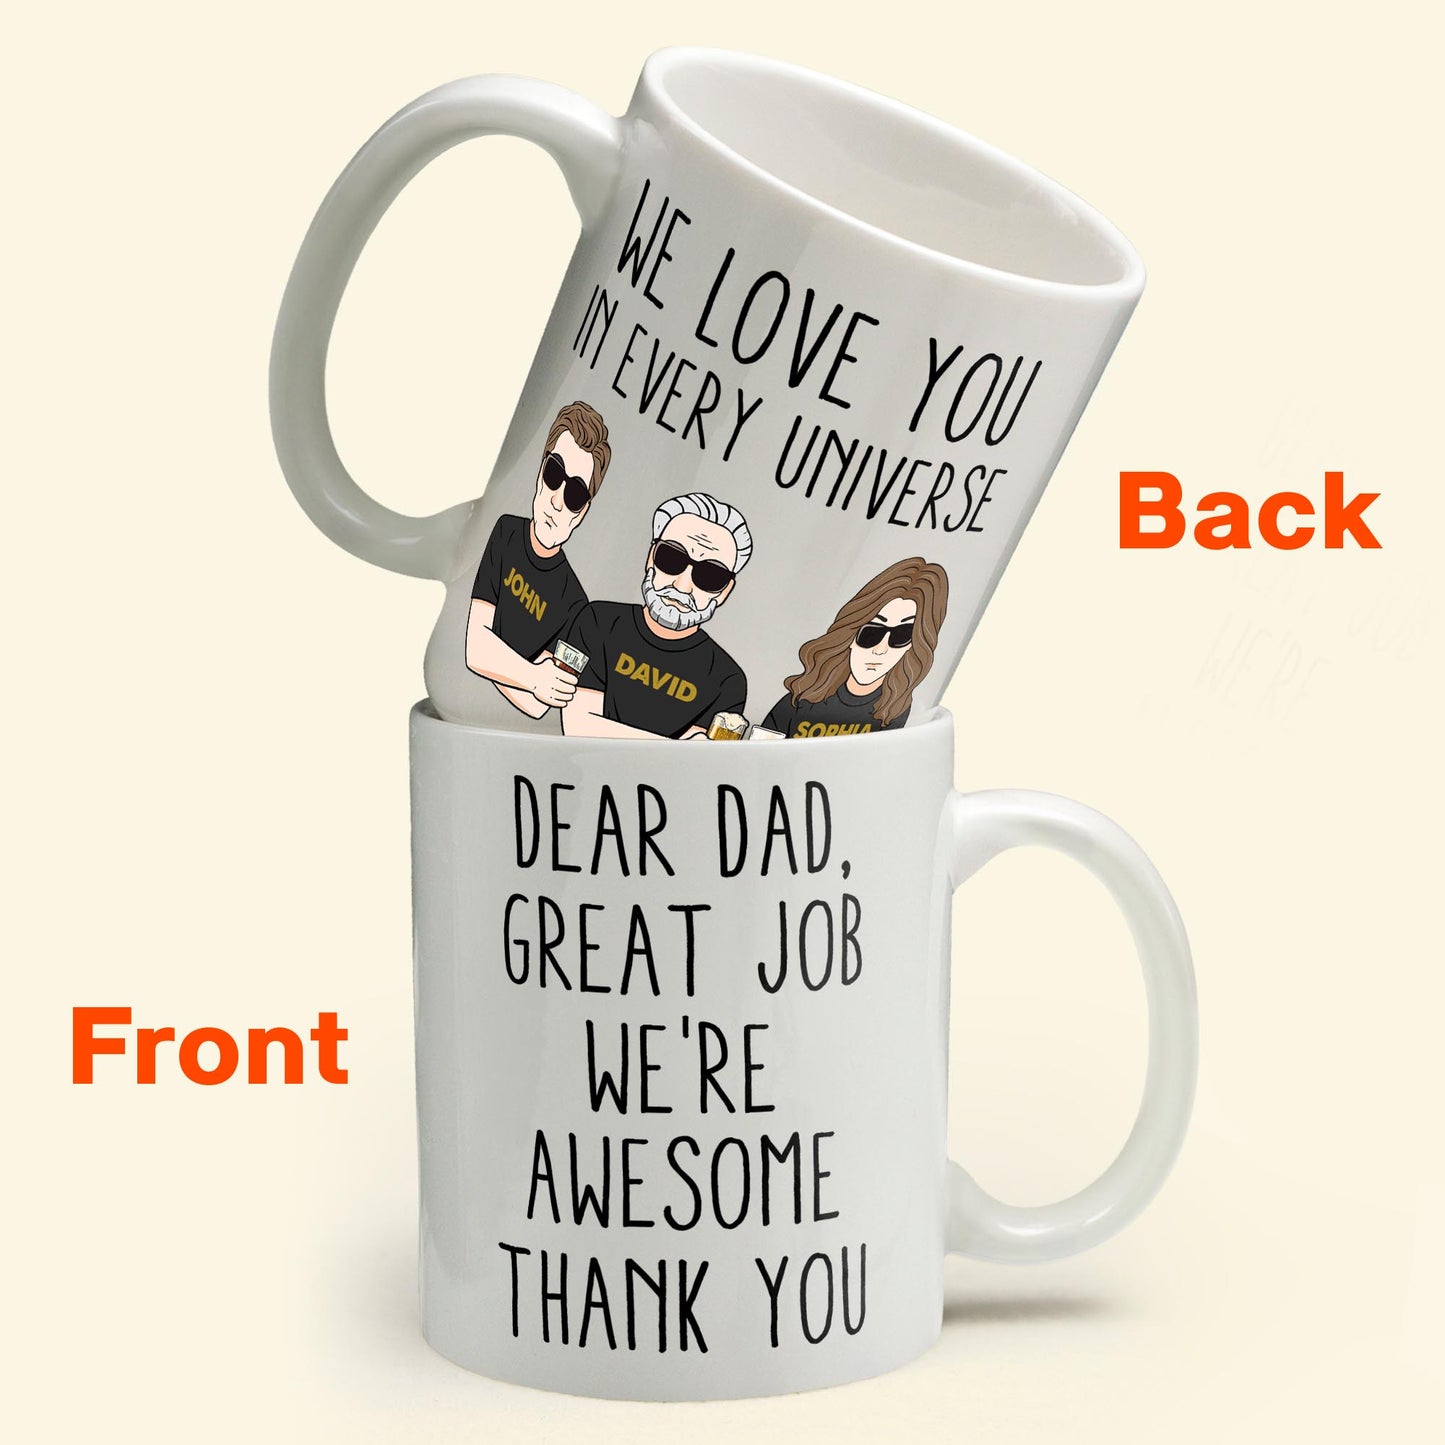 Great Job We're Awesome Thank You - Personalized Mug - Father's Day, Birthday Gift For Dad, Father, Husband, Daughter, Son